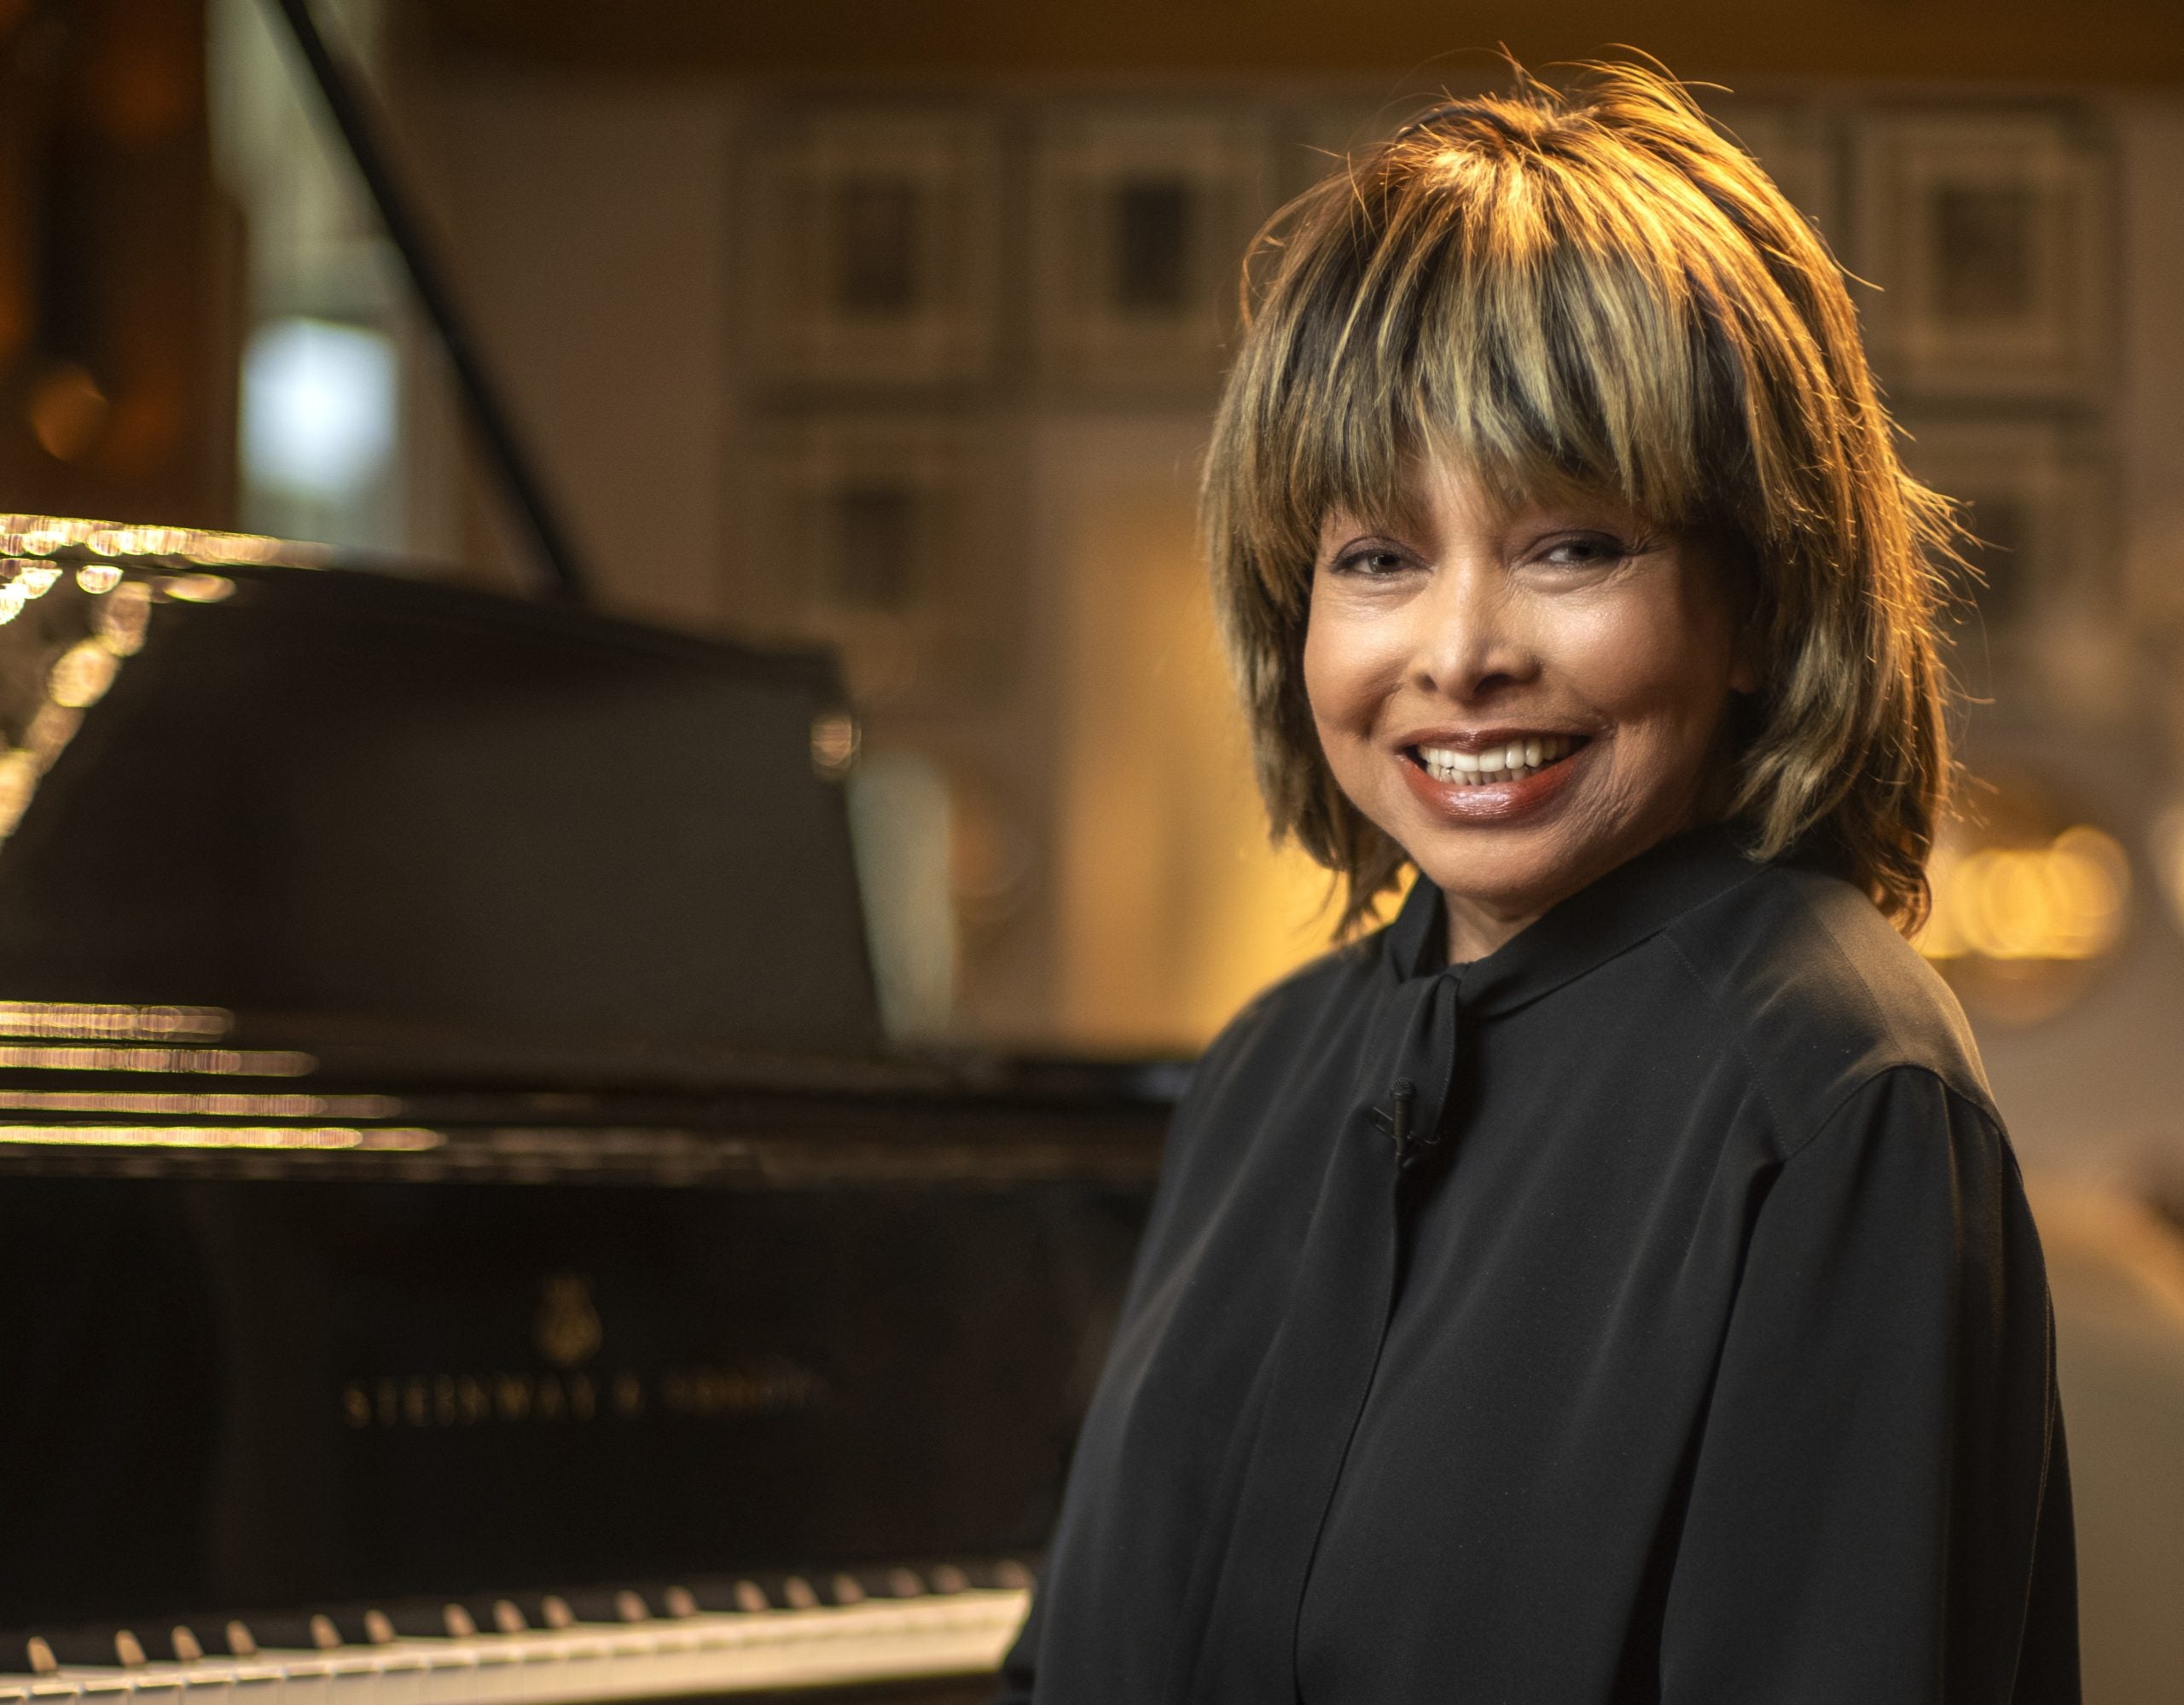 Tina Turner On The Return Of Her Tony Award-Winning Musical And Receiving Her Flowers: 'I Don't Dwell On Recognition'